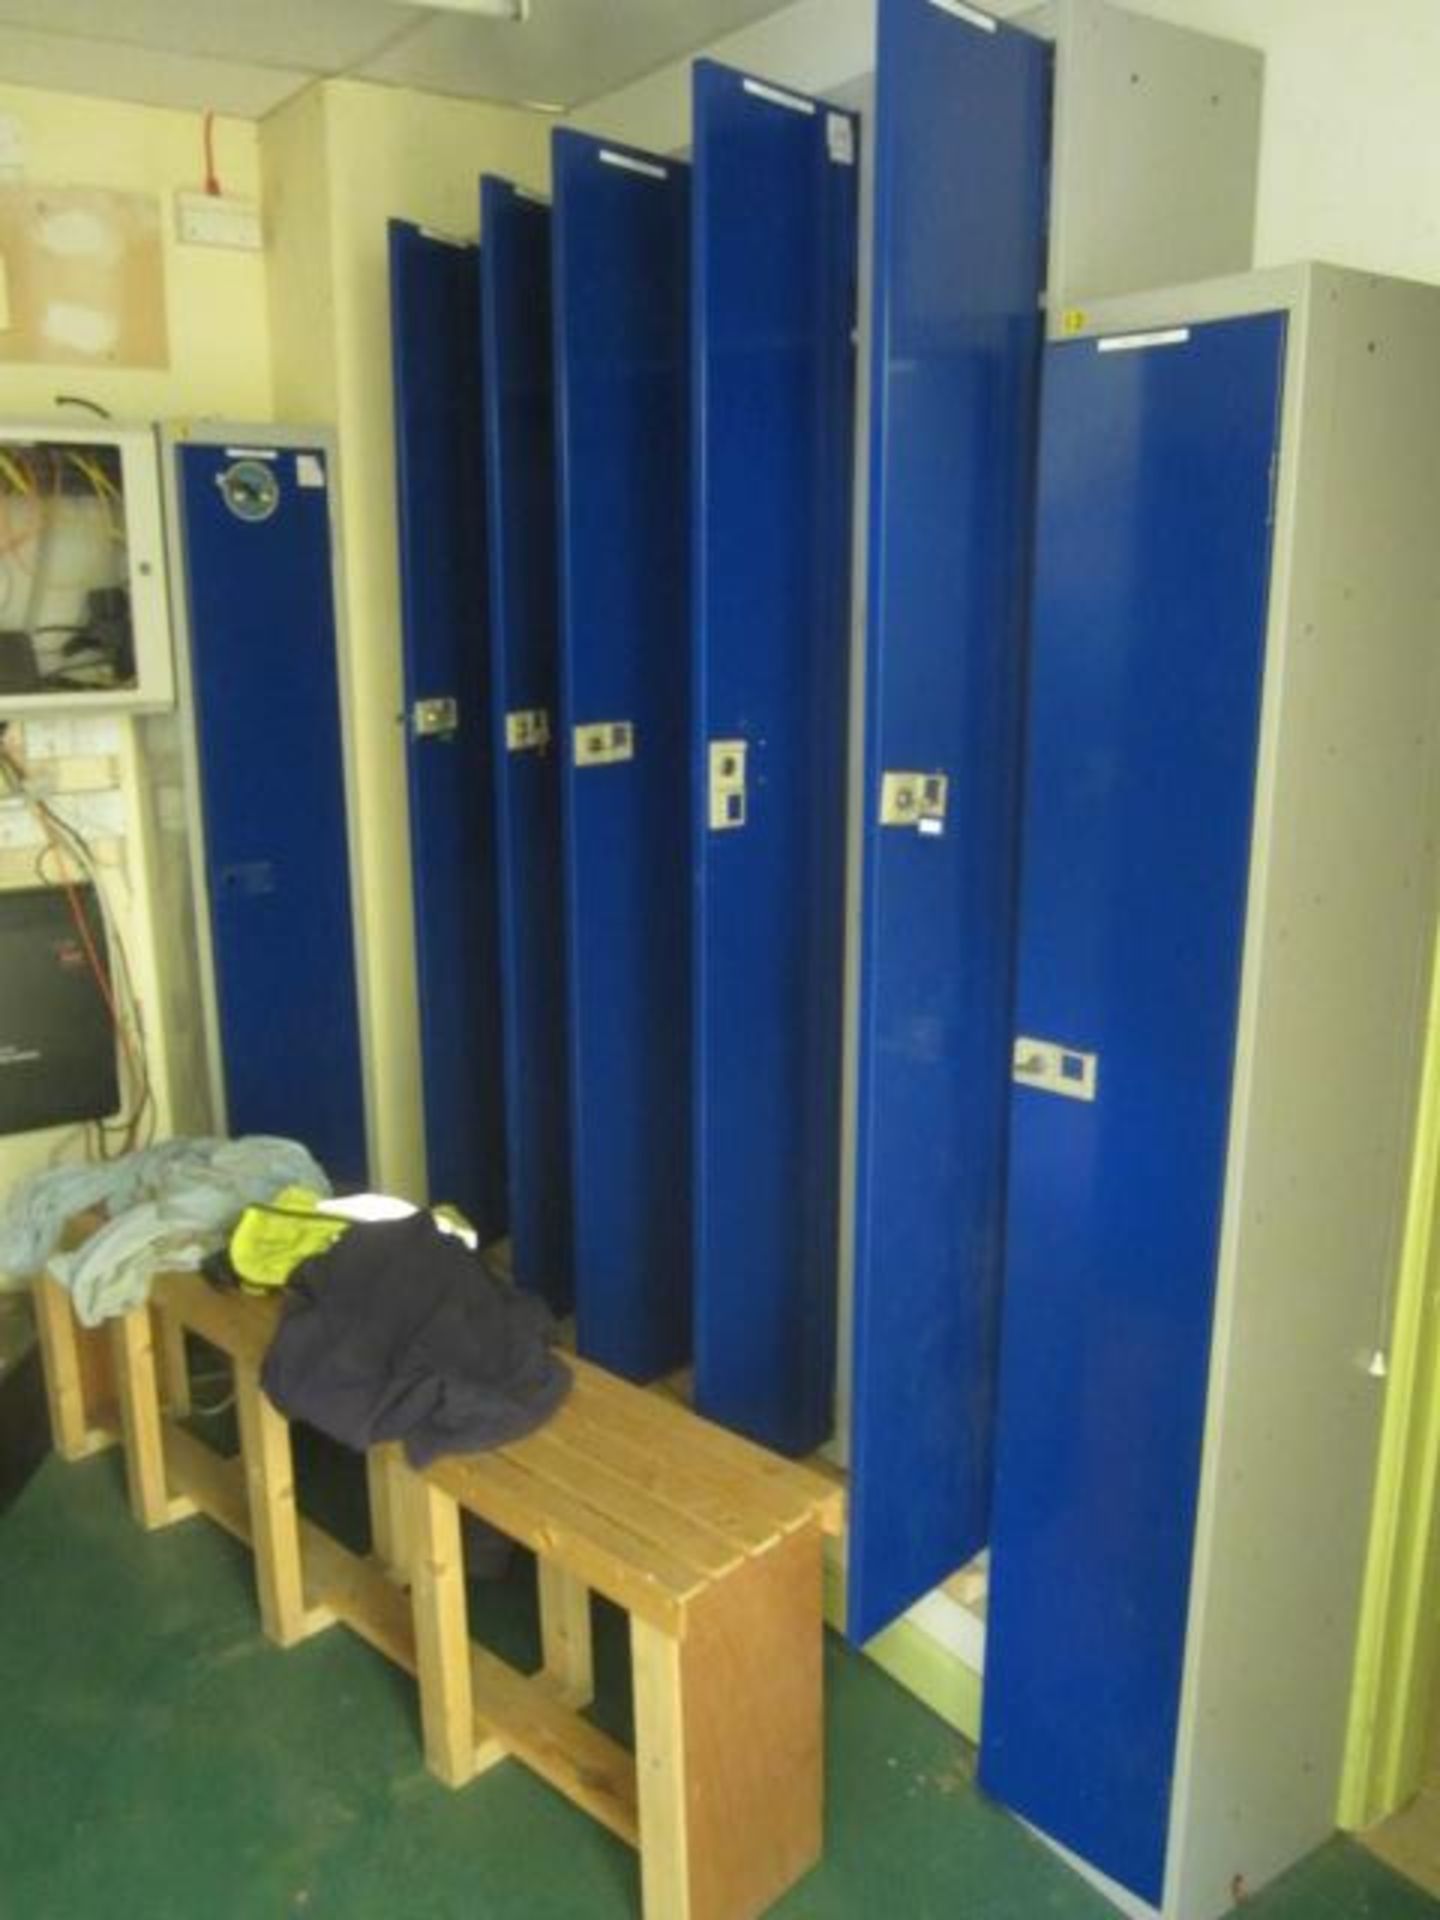 Fourteen single door personnel lockers, wooden slatted bench seat and APC Back UPS - Image 2 of 2